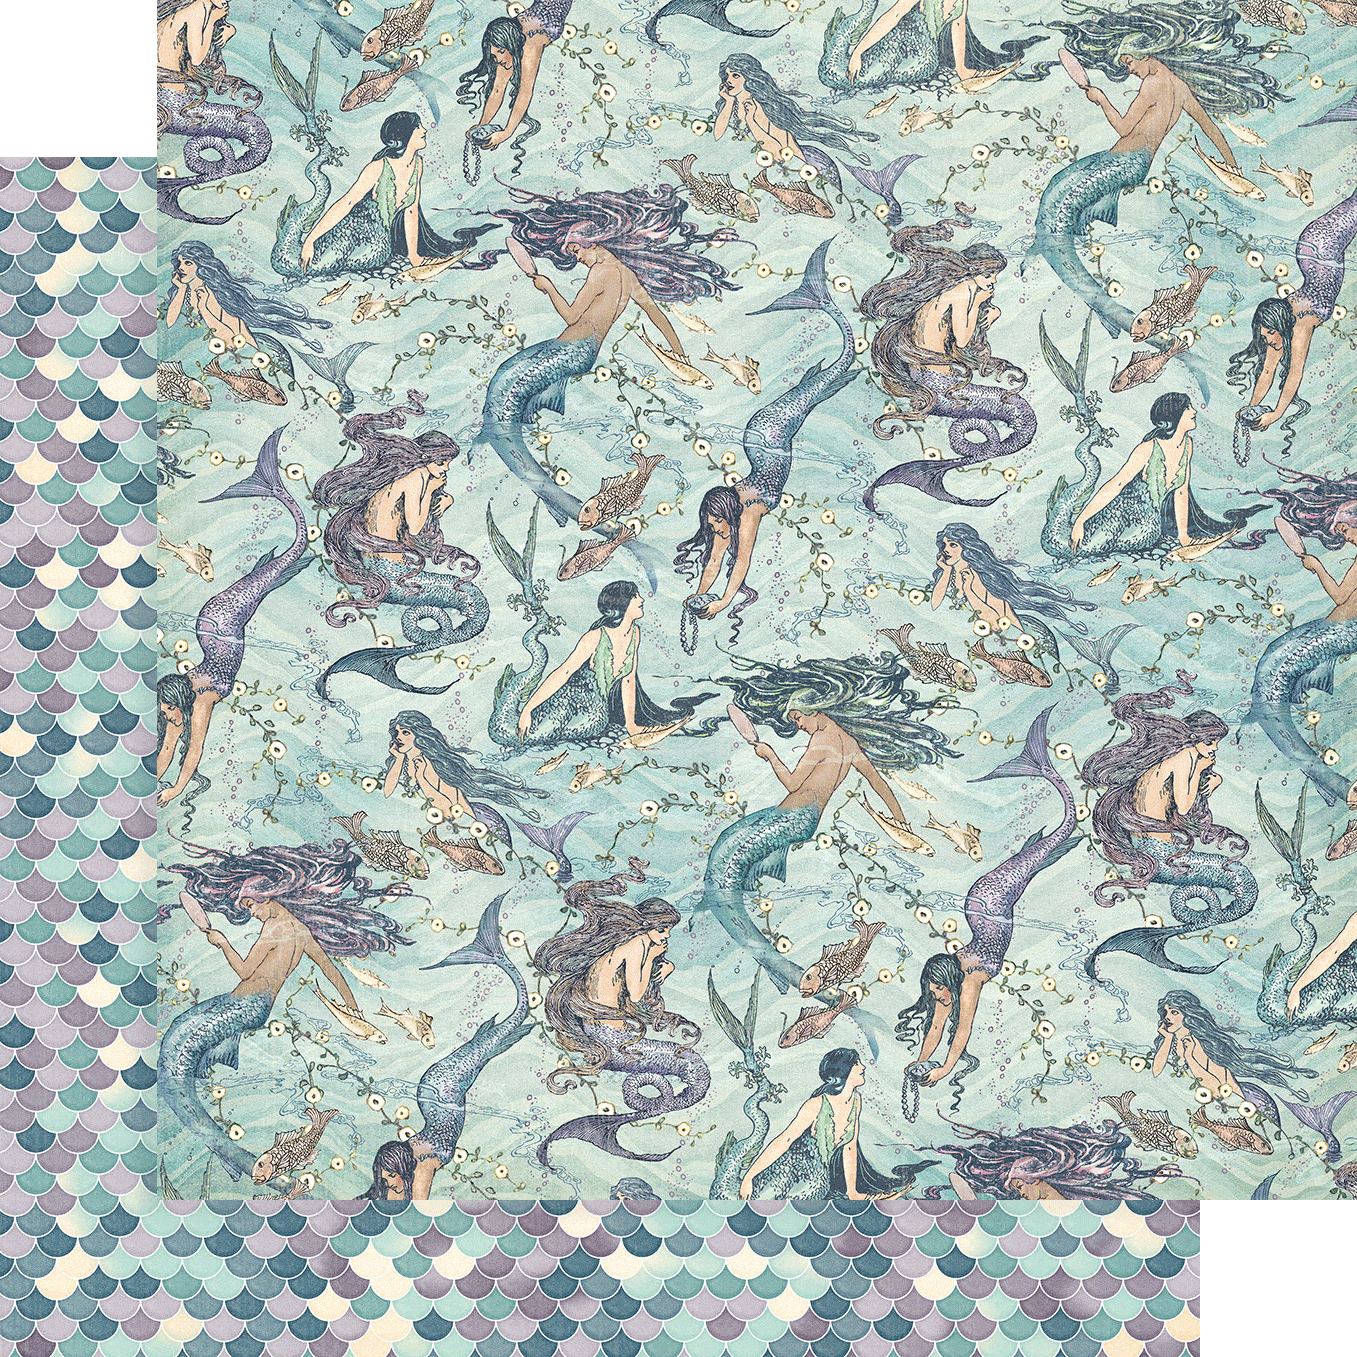 Make A Splash Collection Born To Be A Mermaid 12 x 12 Double-Sided Scrapbook Paper by Graphic 45 - Scrapbook Supply Companies